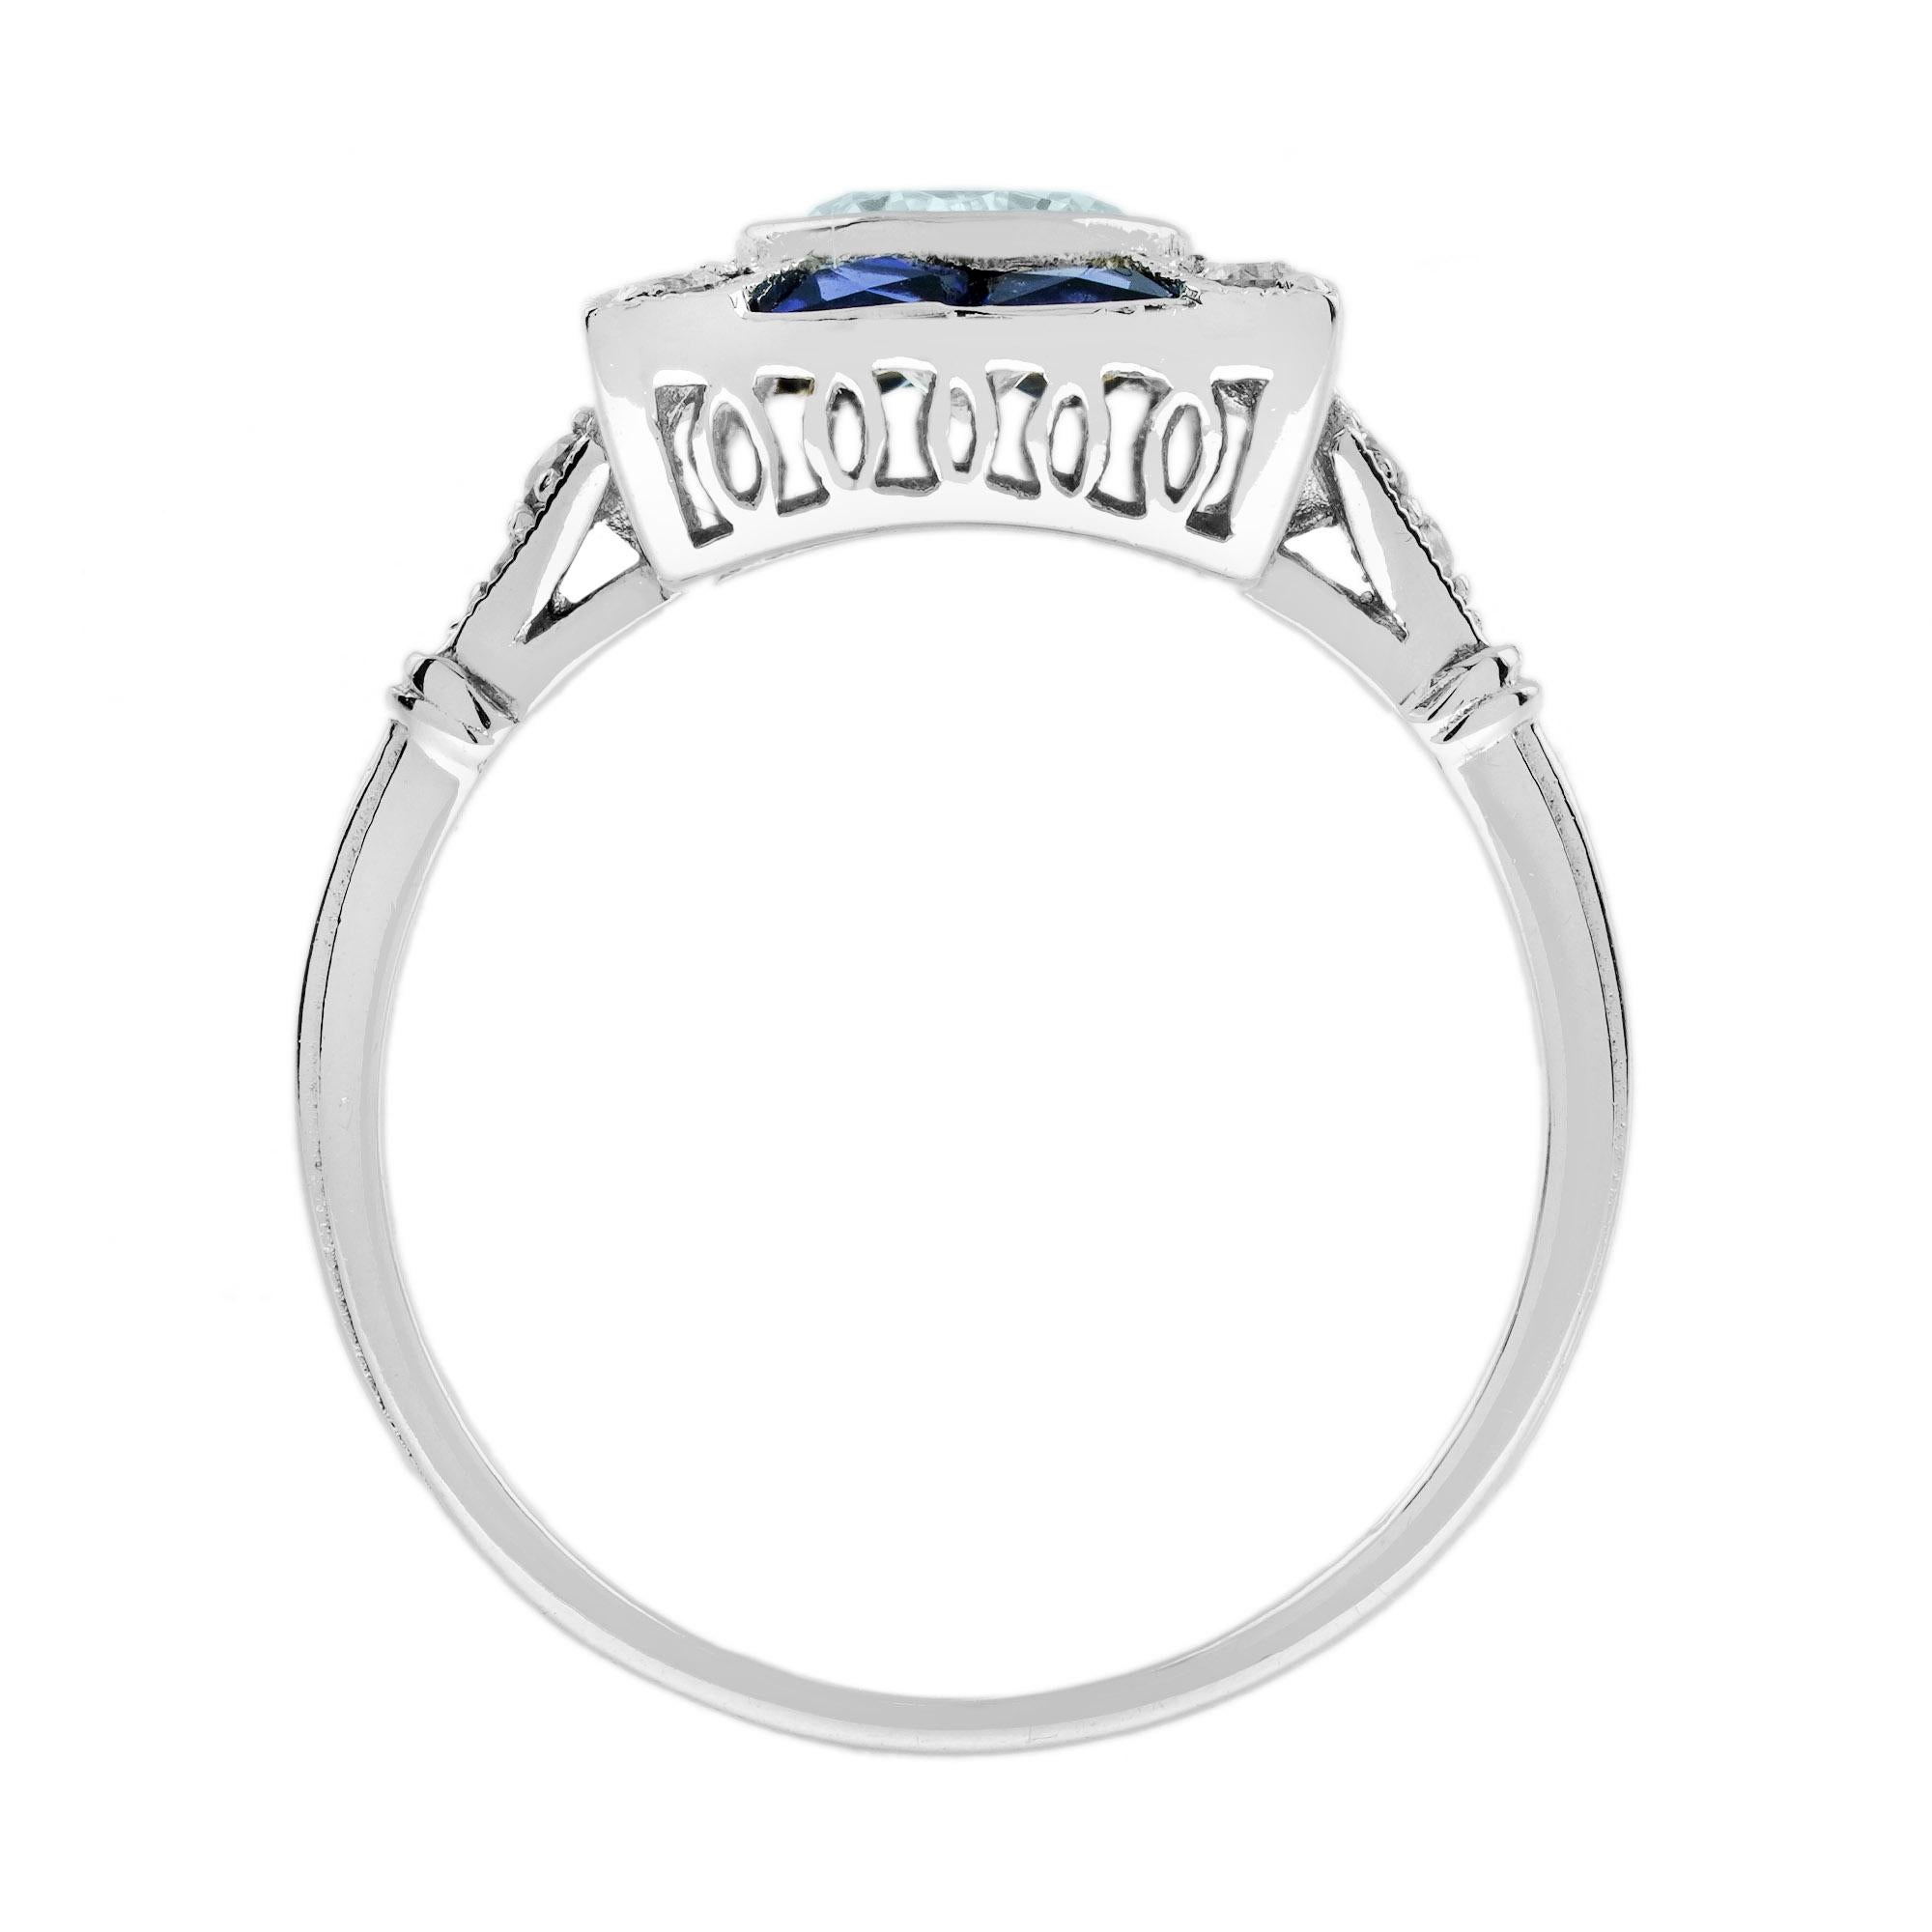 For Sale:  Aquamarine Diamond and Blue Sapphire Art Deco Style Engagement Ring in 18K Gold 6